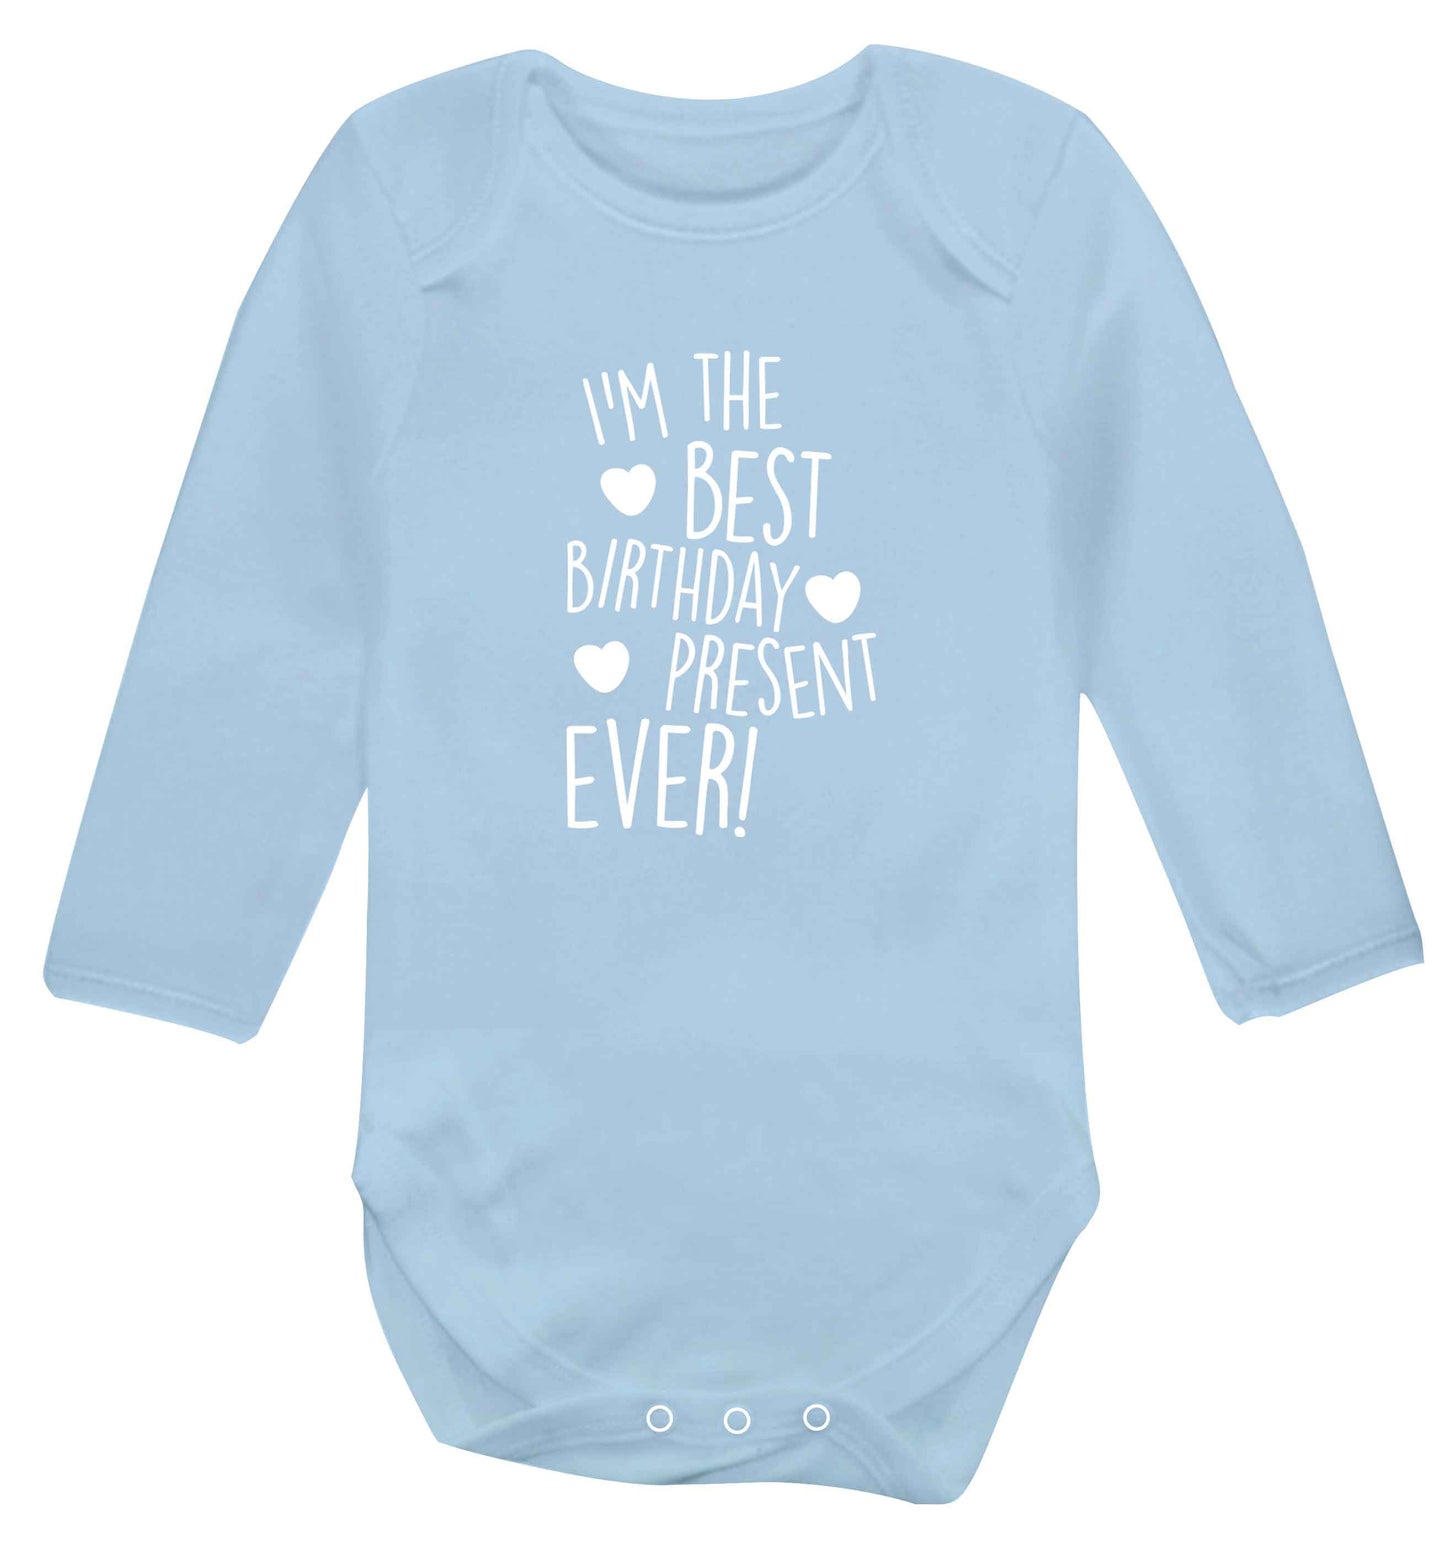 I'm the best birthday present ever baby vest long sleeved pale blue 6-12 months